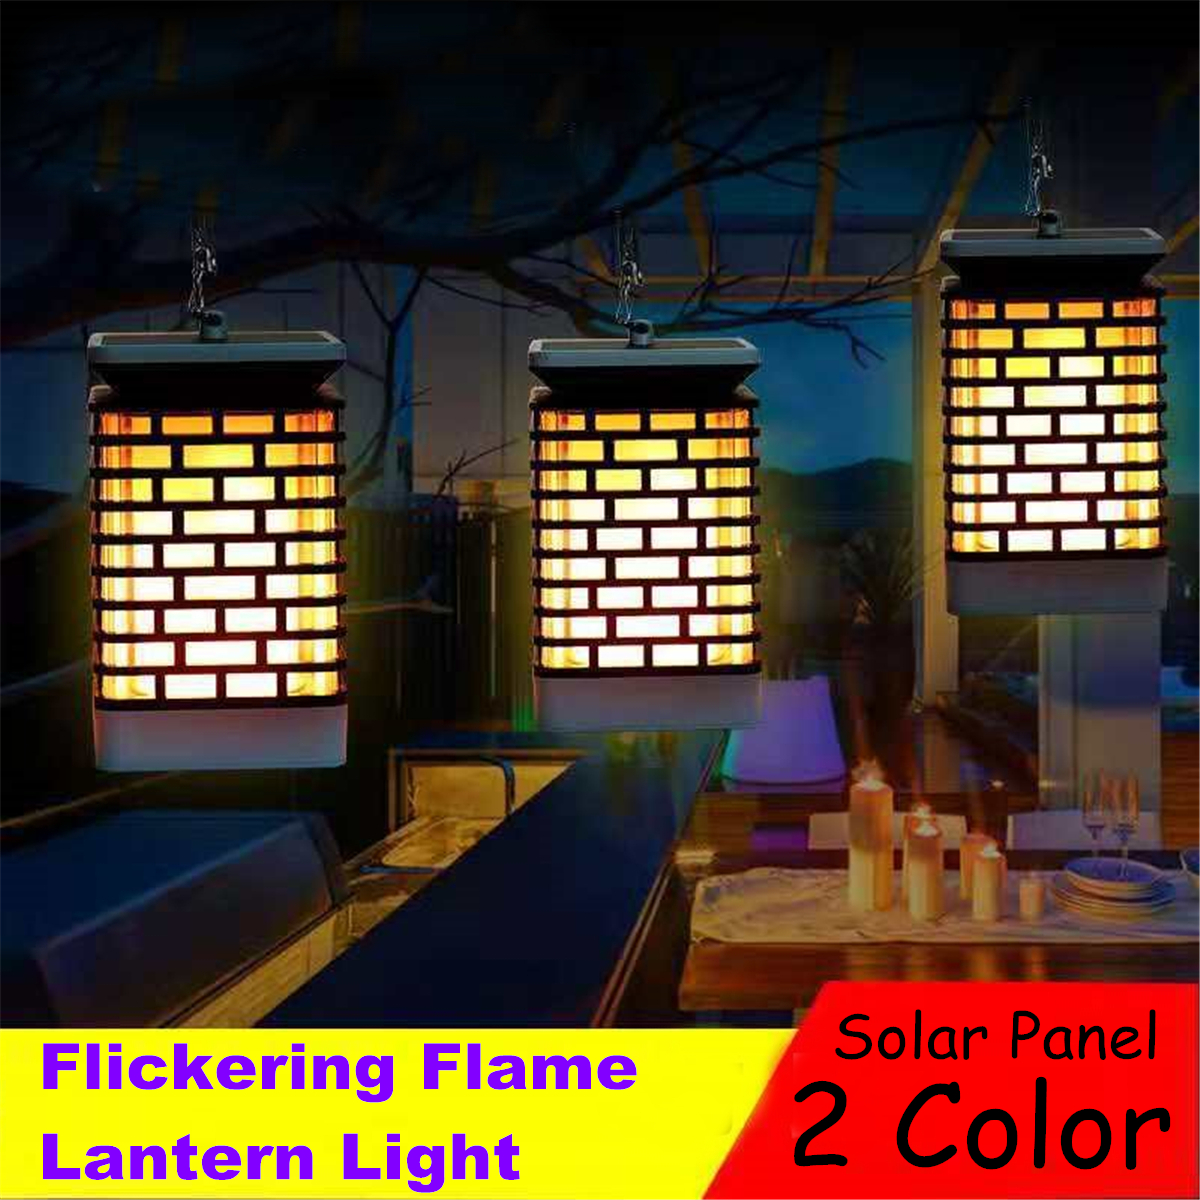 LED-Solar-Hanging-Light-Flickering-Flame-Lawn-Garden-Candle-Lantern-Lamp-for-Home-Garden-Decoration-1793632-1